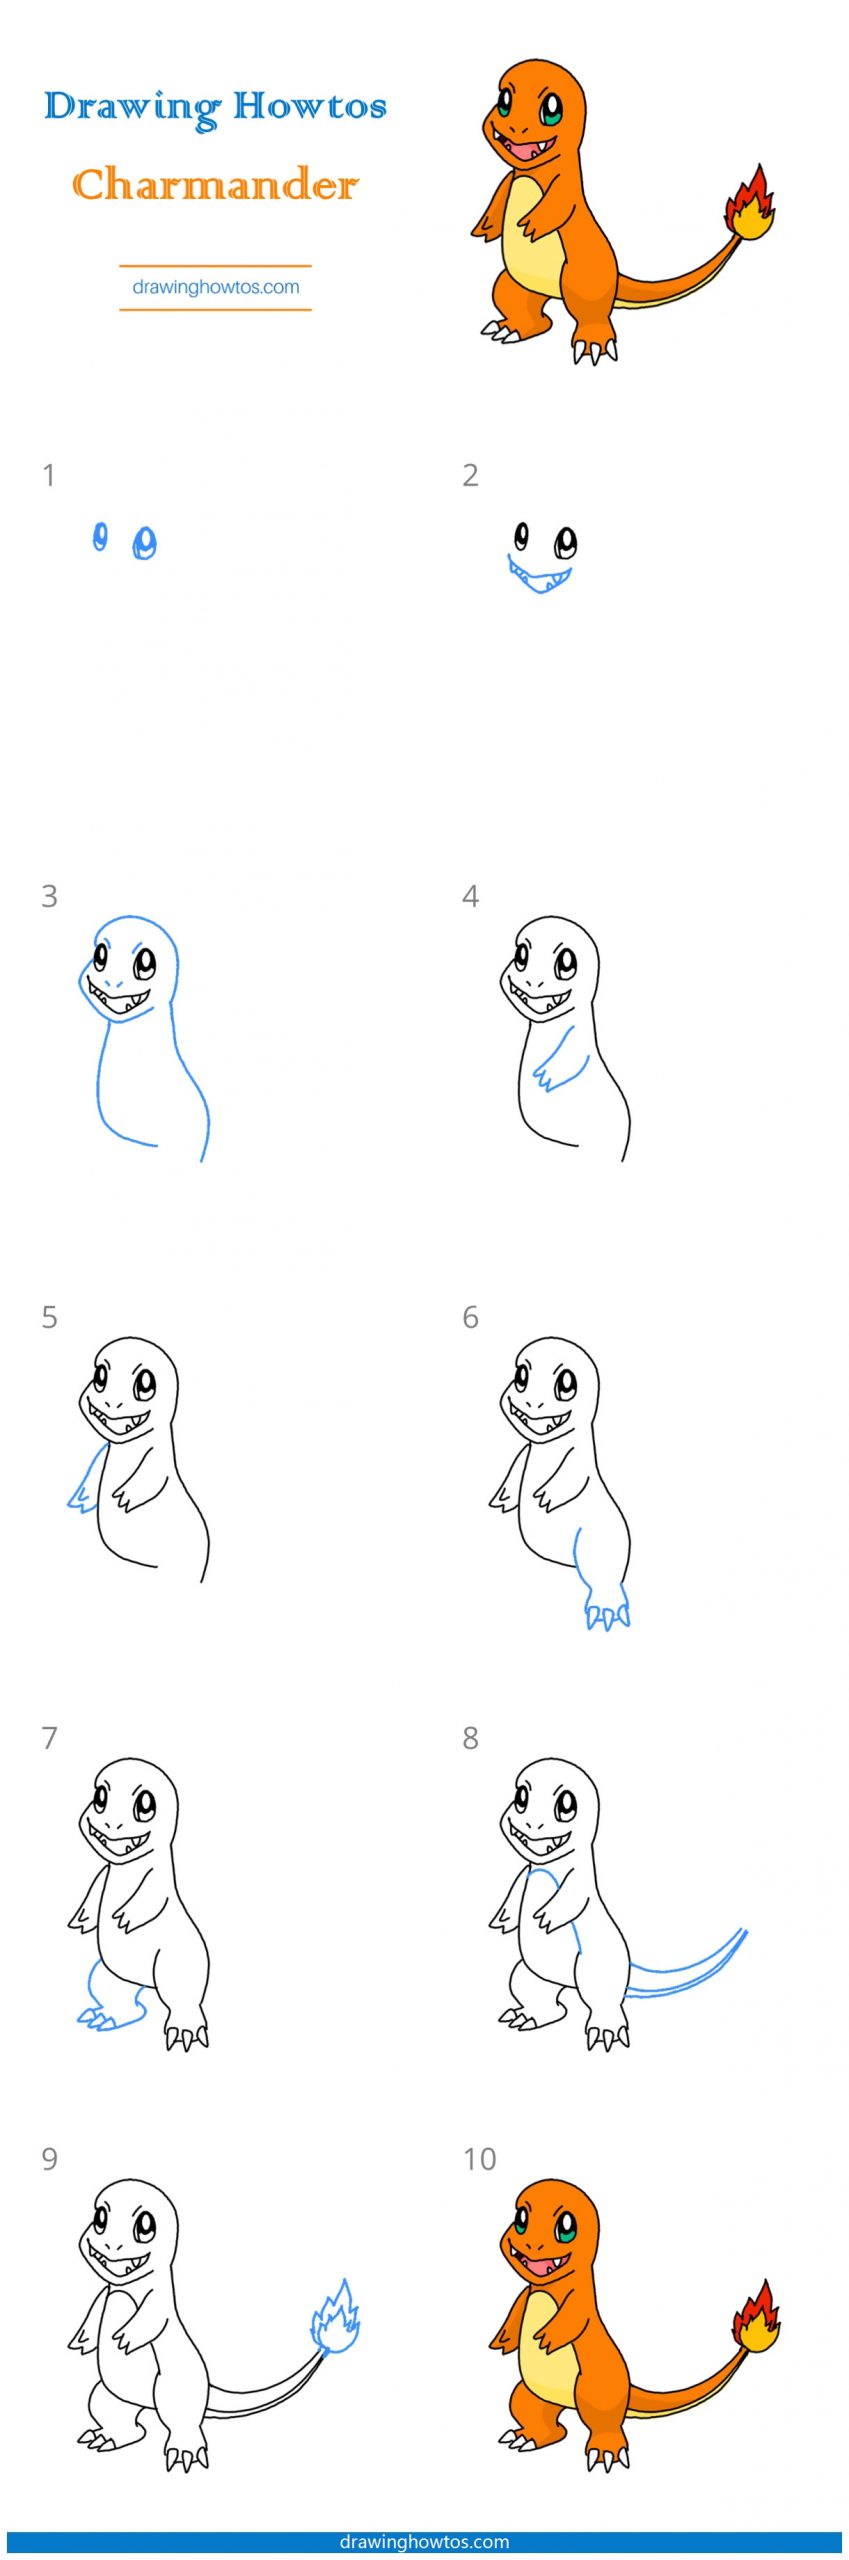 How to Draw Charmander from Pokemon Step by Step